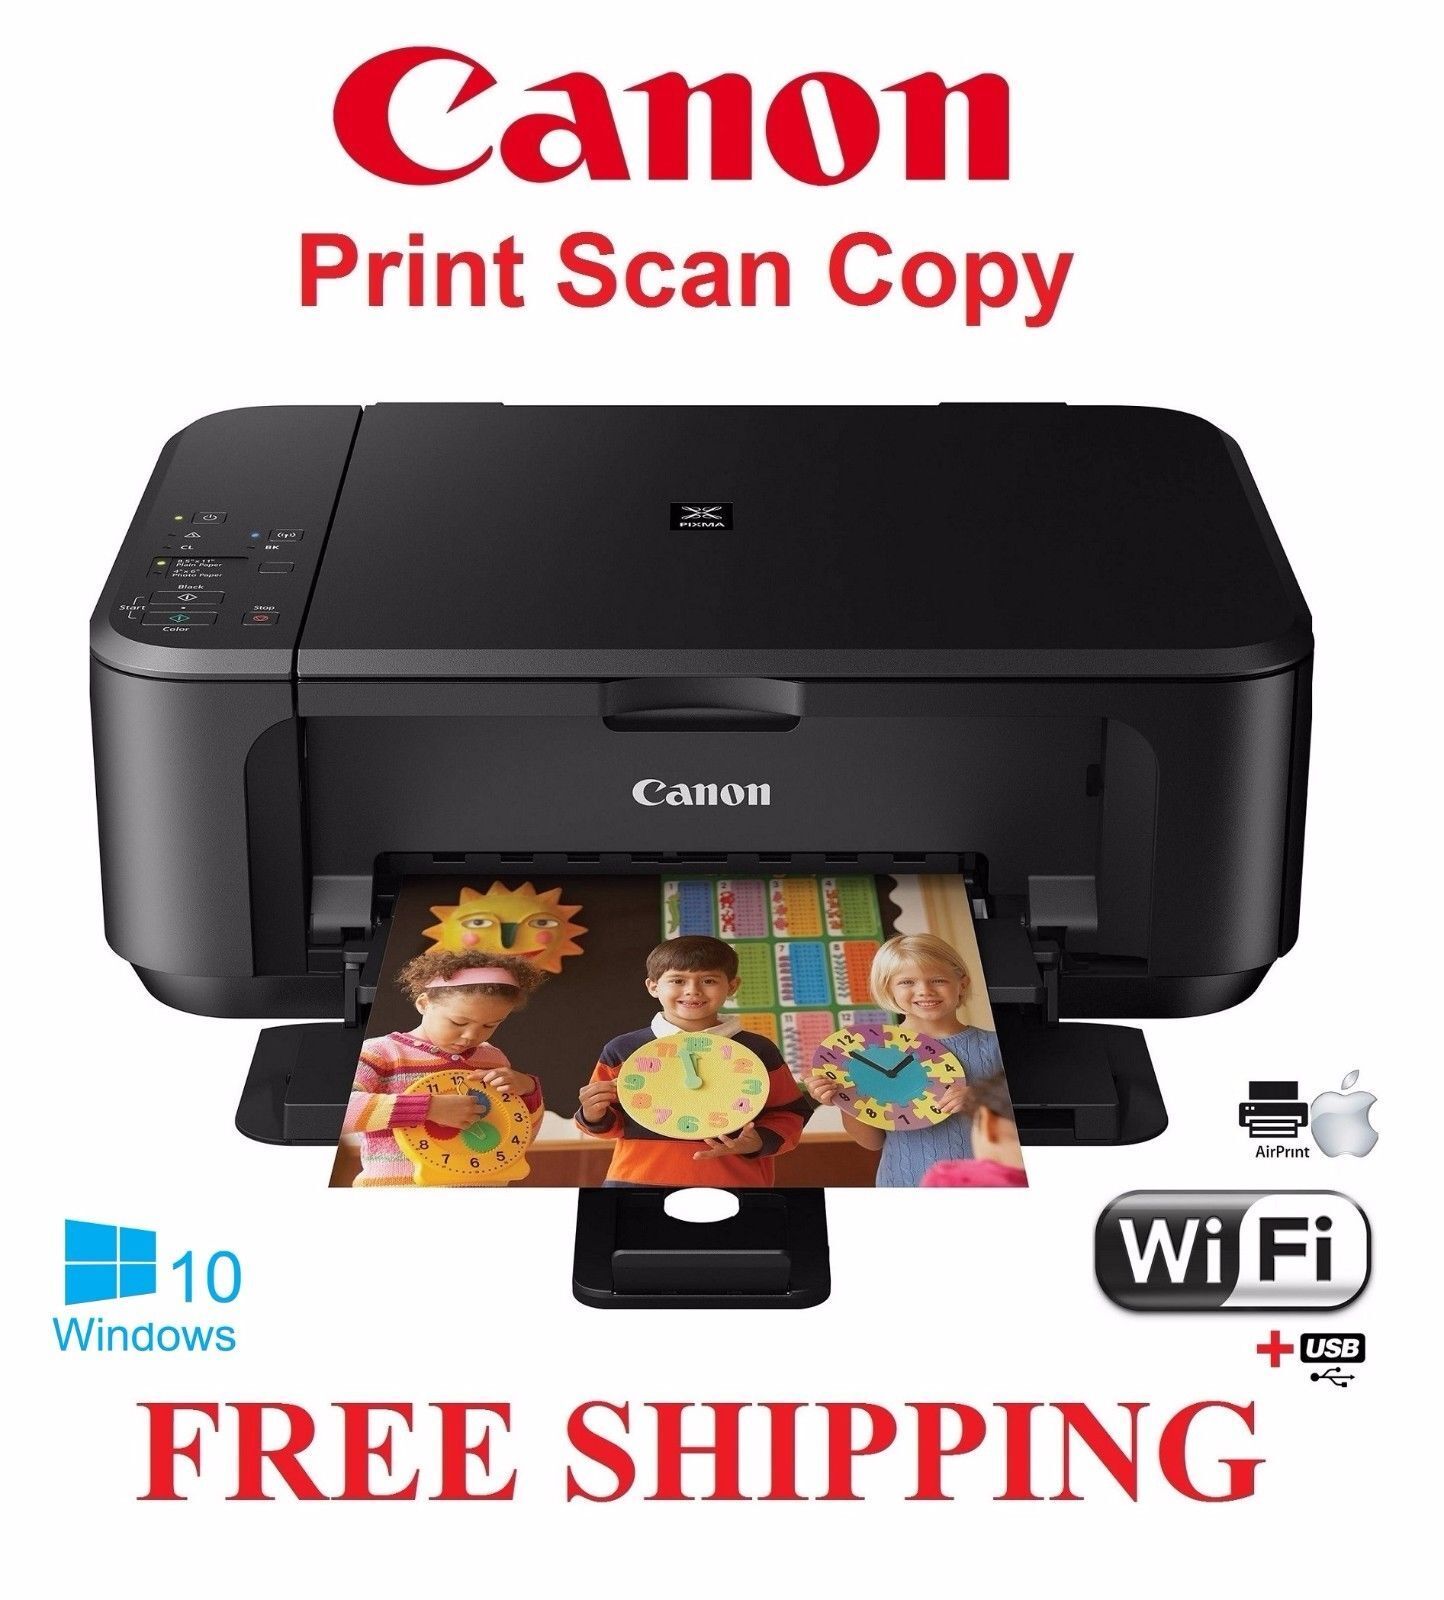 NEW Canon Pixma MG3620 All In One Wireless Printer-Scan Copy-Holiday Sale